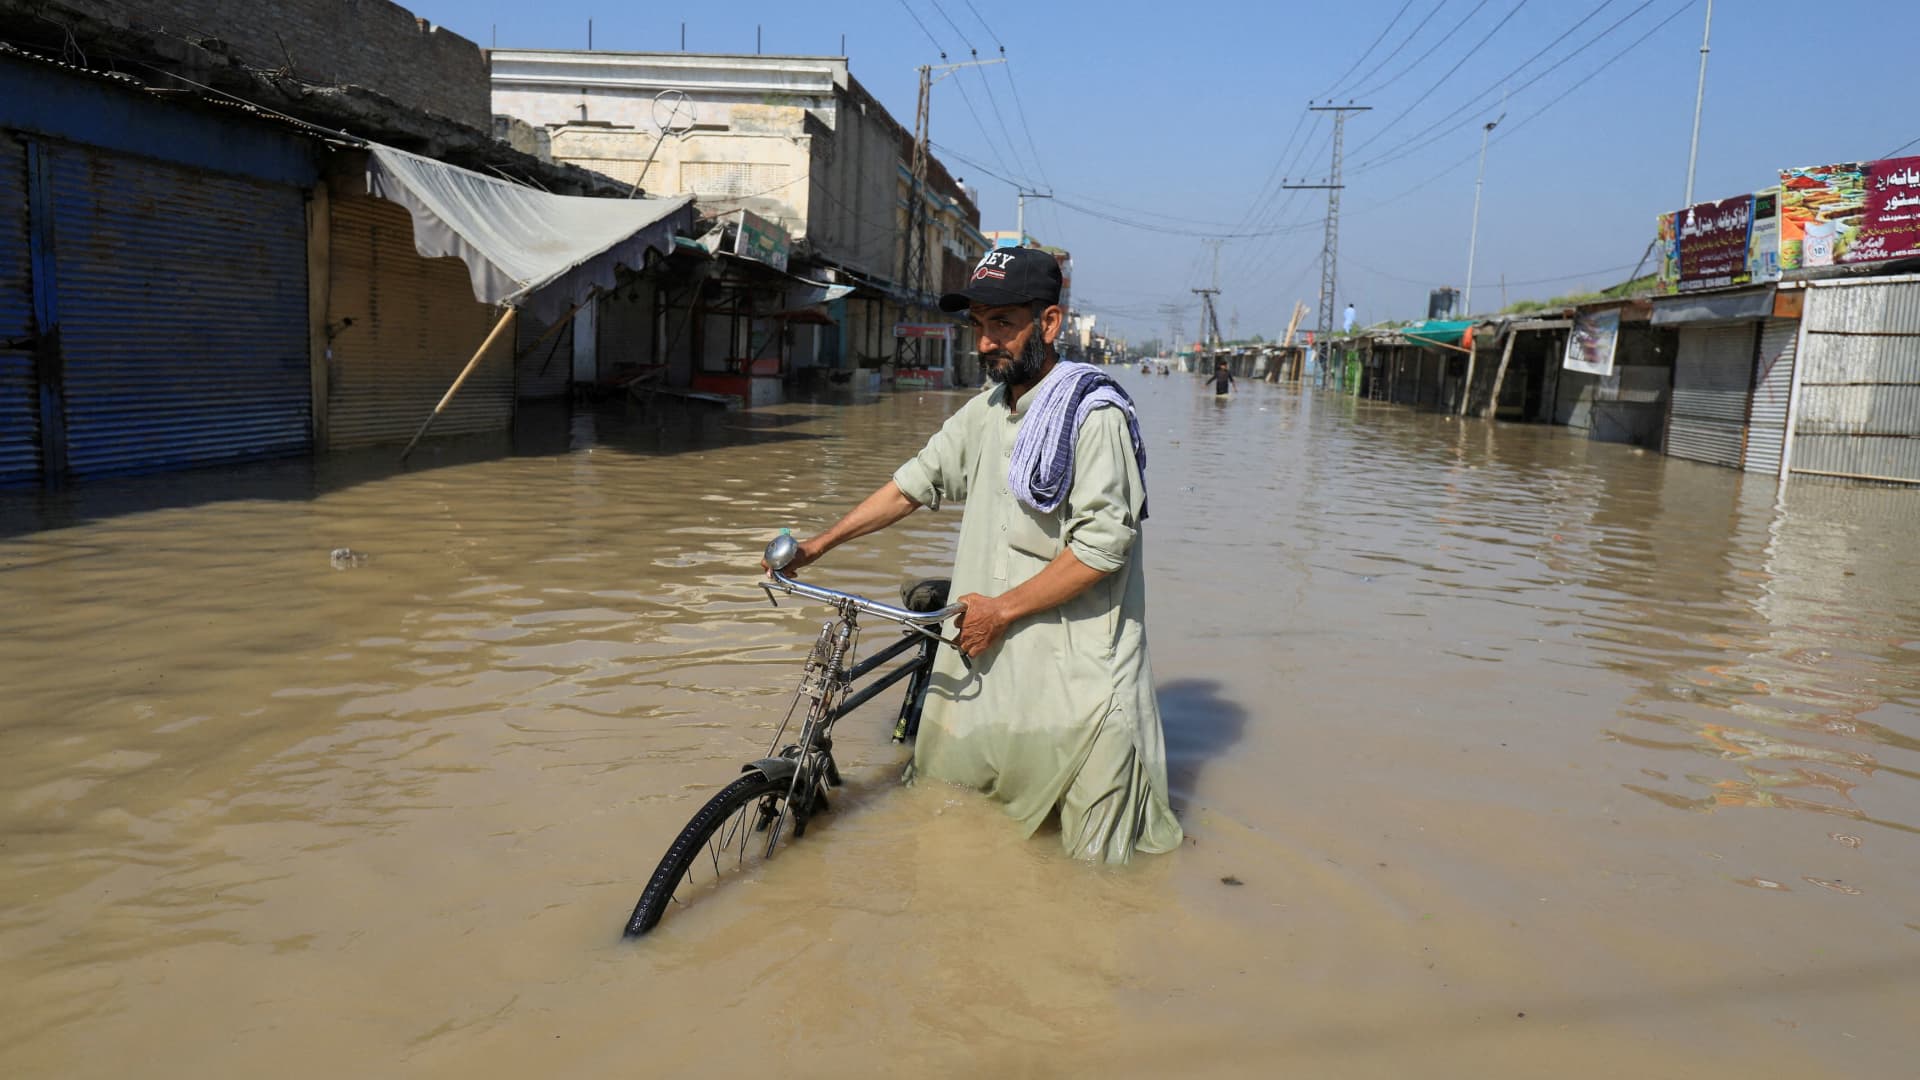 A flooded area in Nowshera, Pakistan, on Aug. 29, 2022.